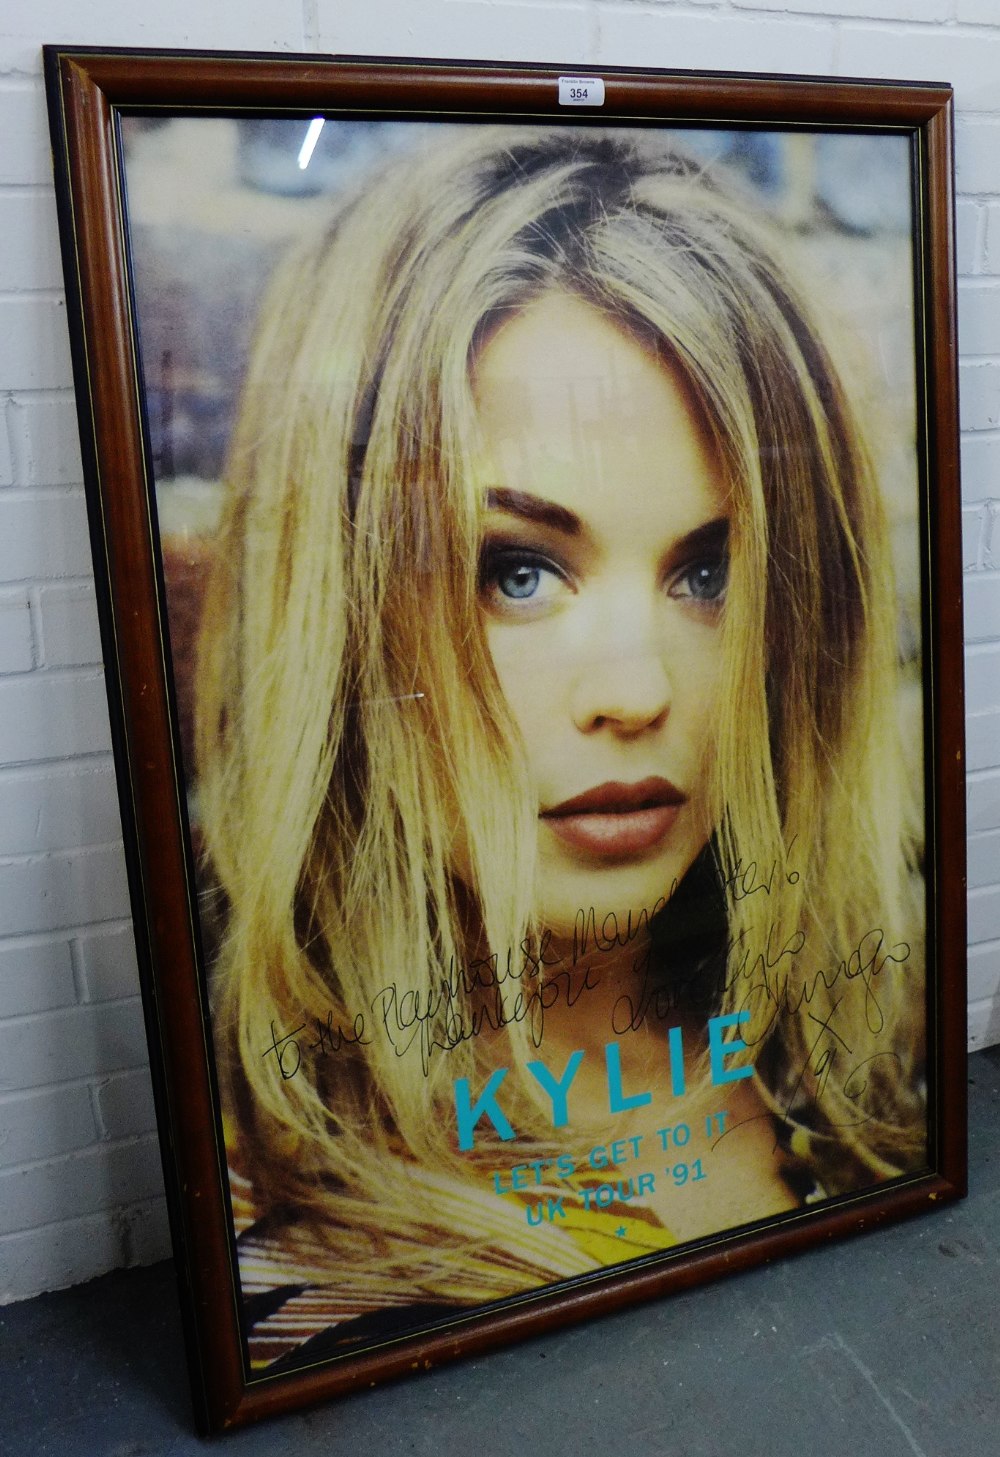 Kylie Minogue (b.1968), framed 'Lets Get to It', UK Tour, 1991, Promotional Poster, signed in ink '